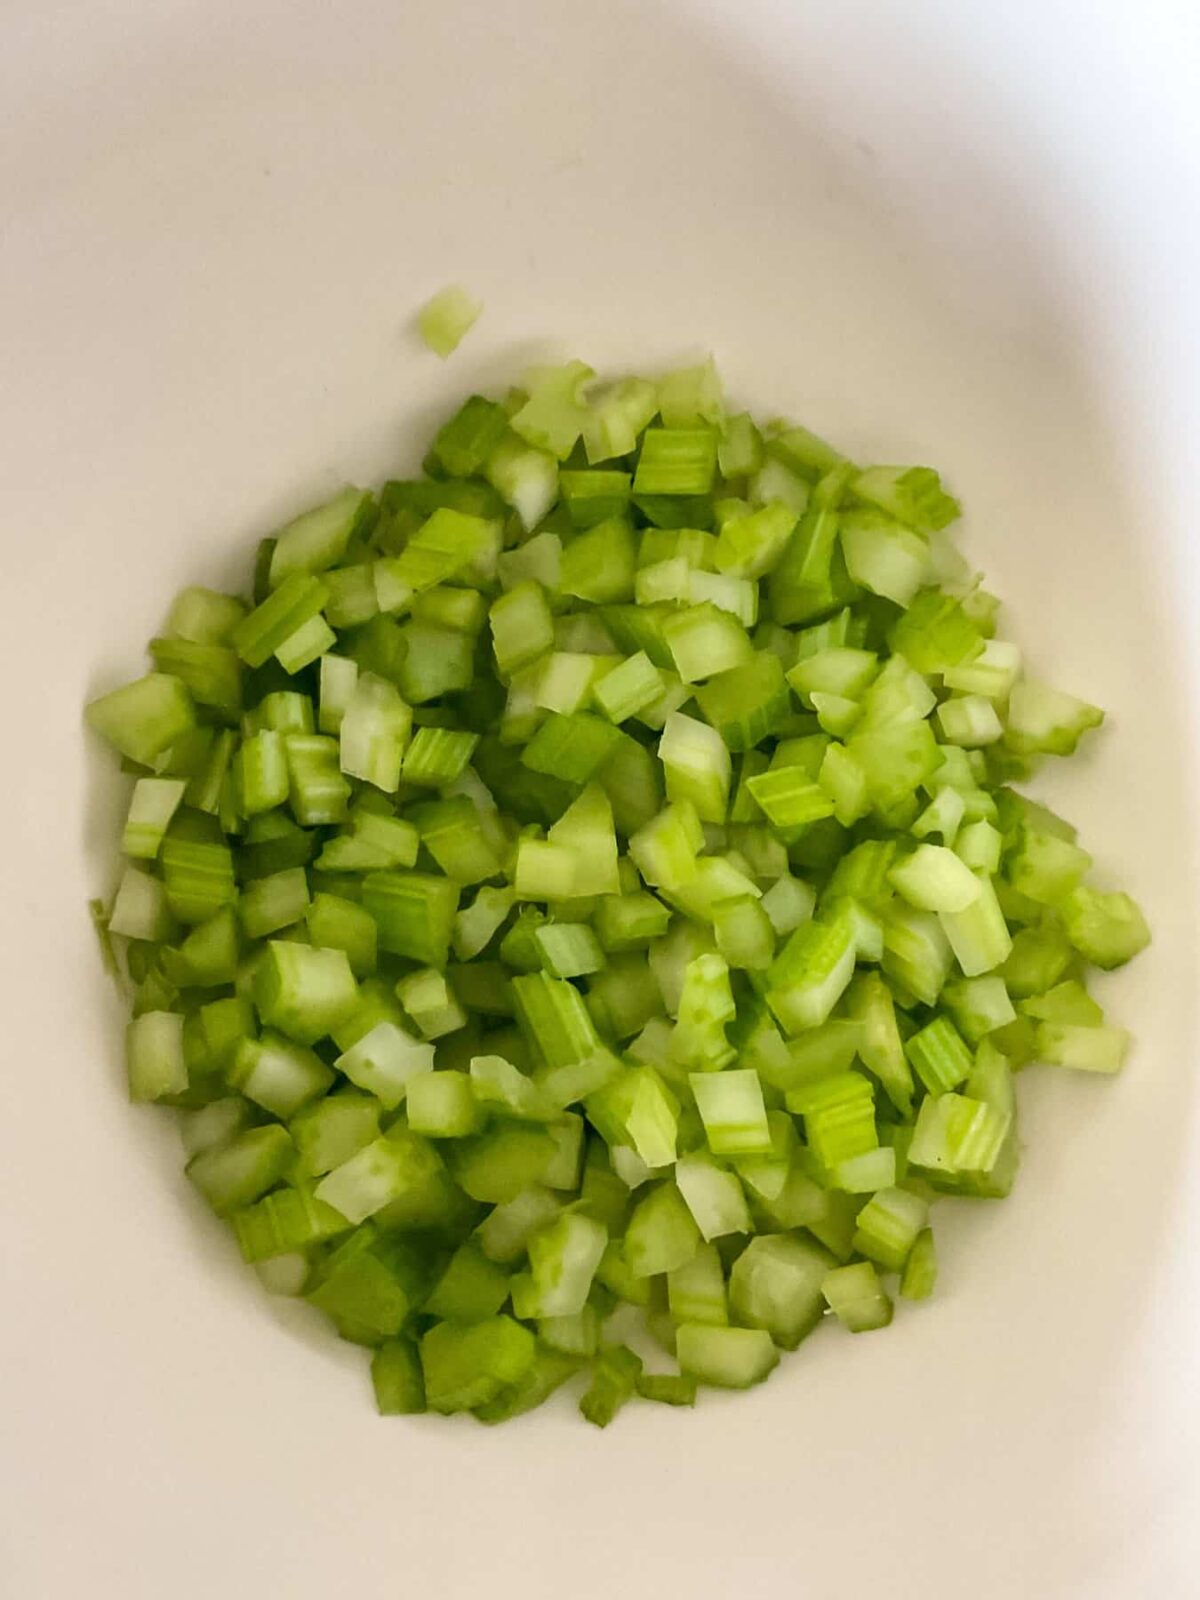 Fine diced celery in a mixing bowl.